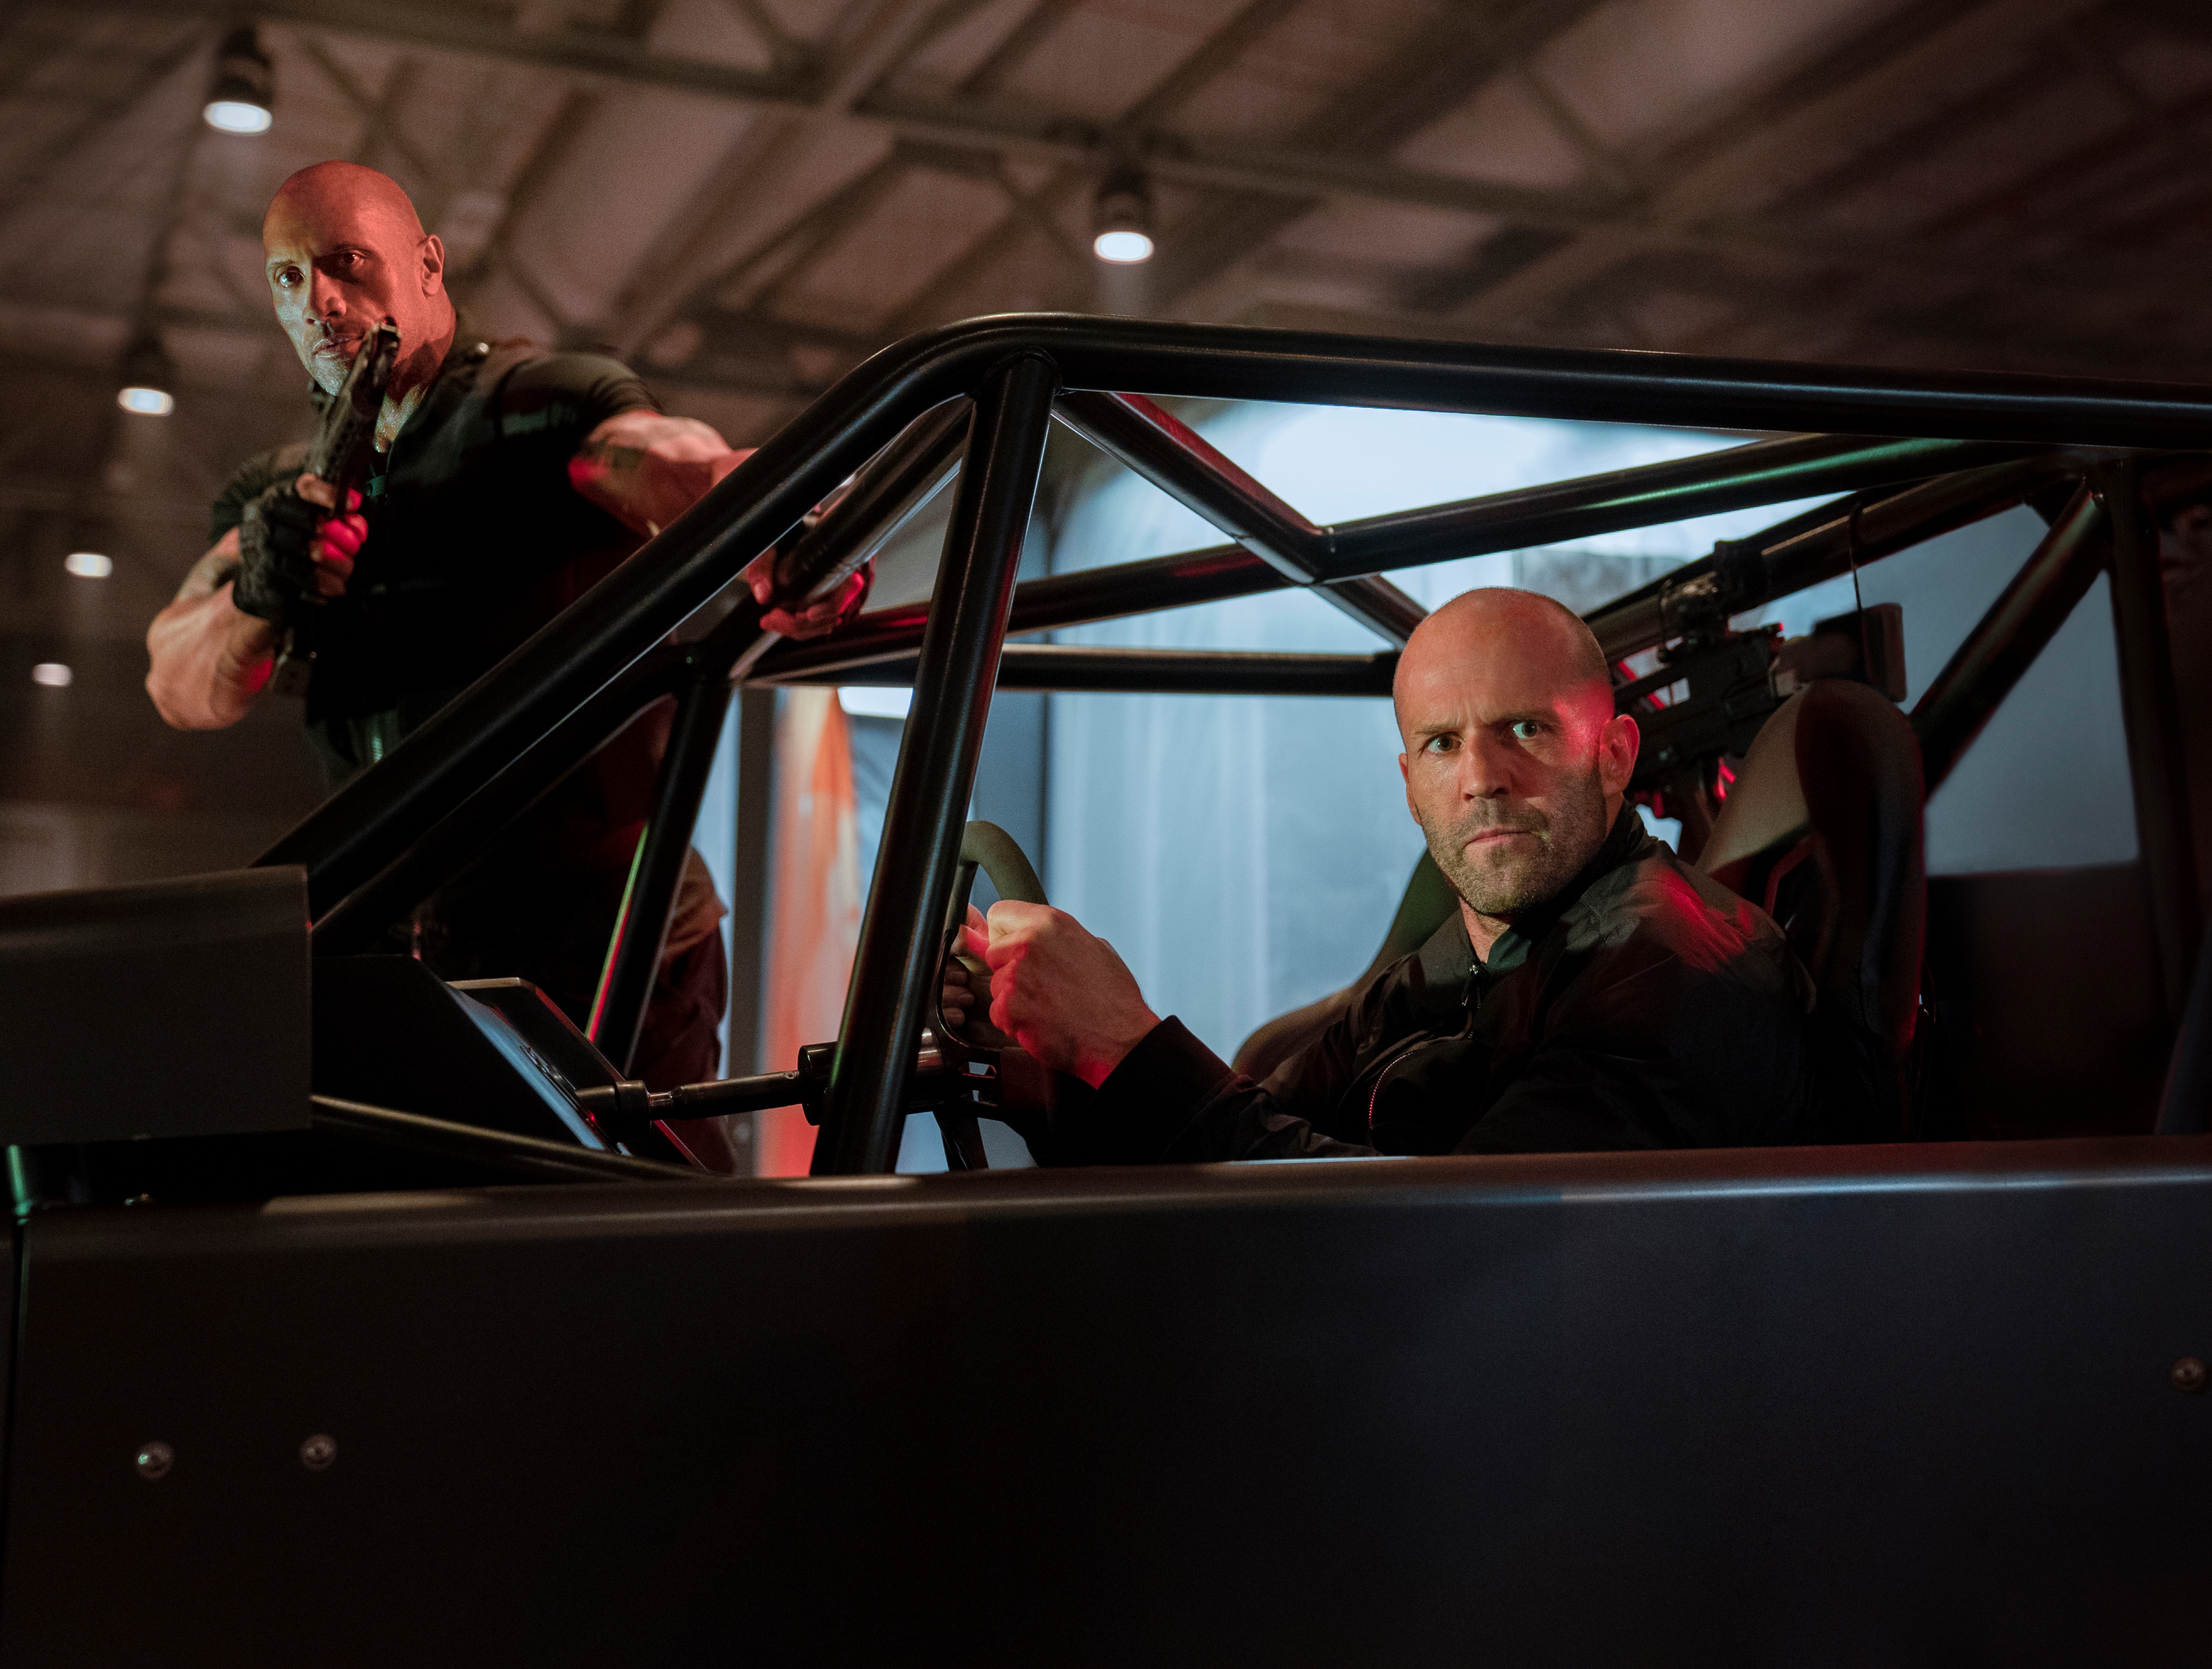 Movie Fast & Furious Presents: Hobbs & Shaw HD Wallpaper | Background Image